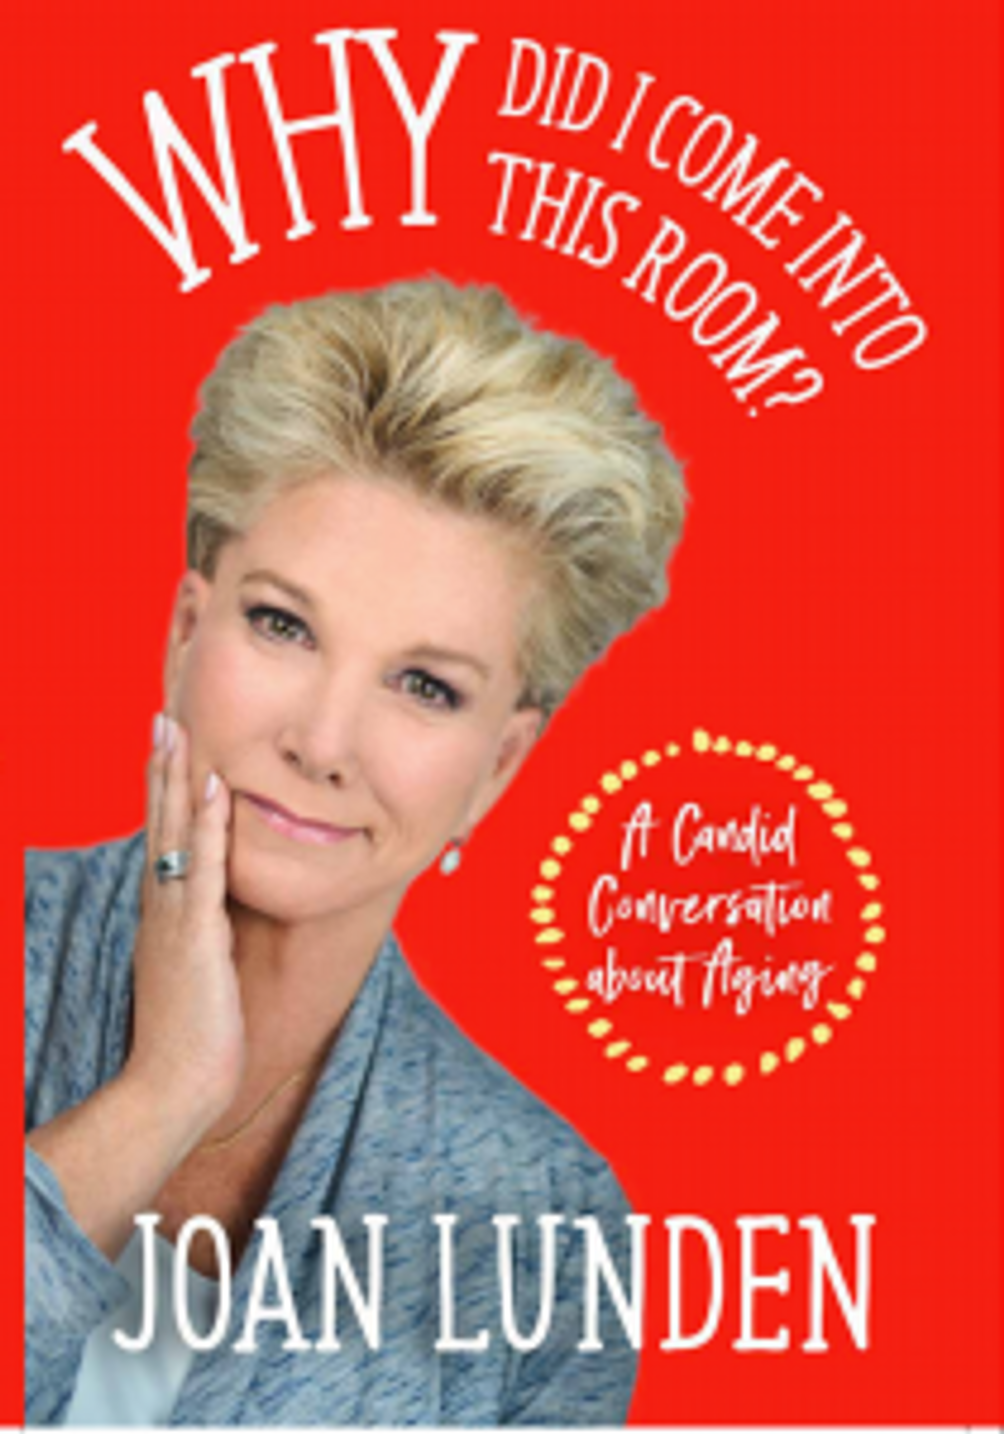 Joan Lunden's book, "Why Did I Come Into This Room?"